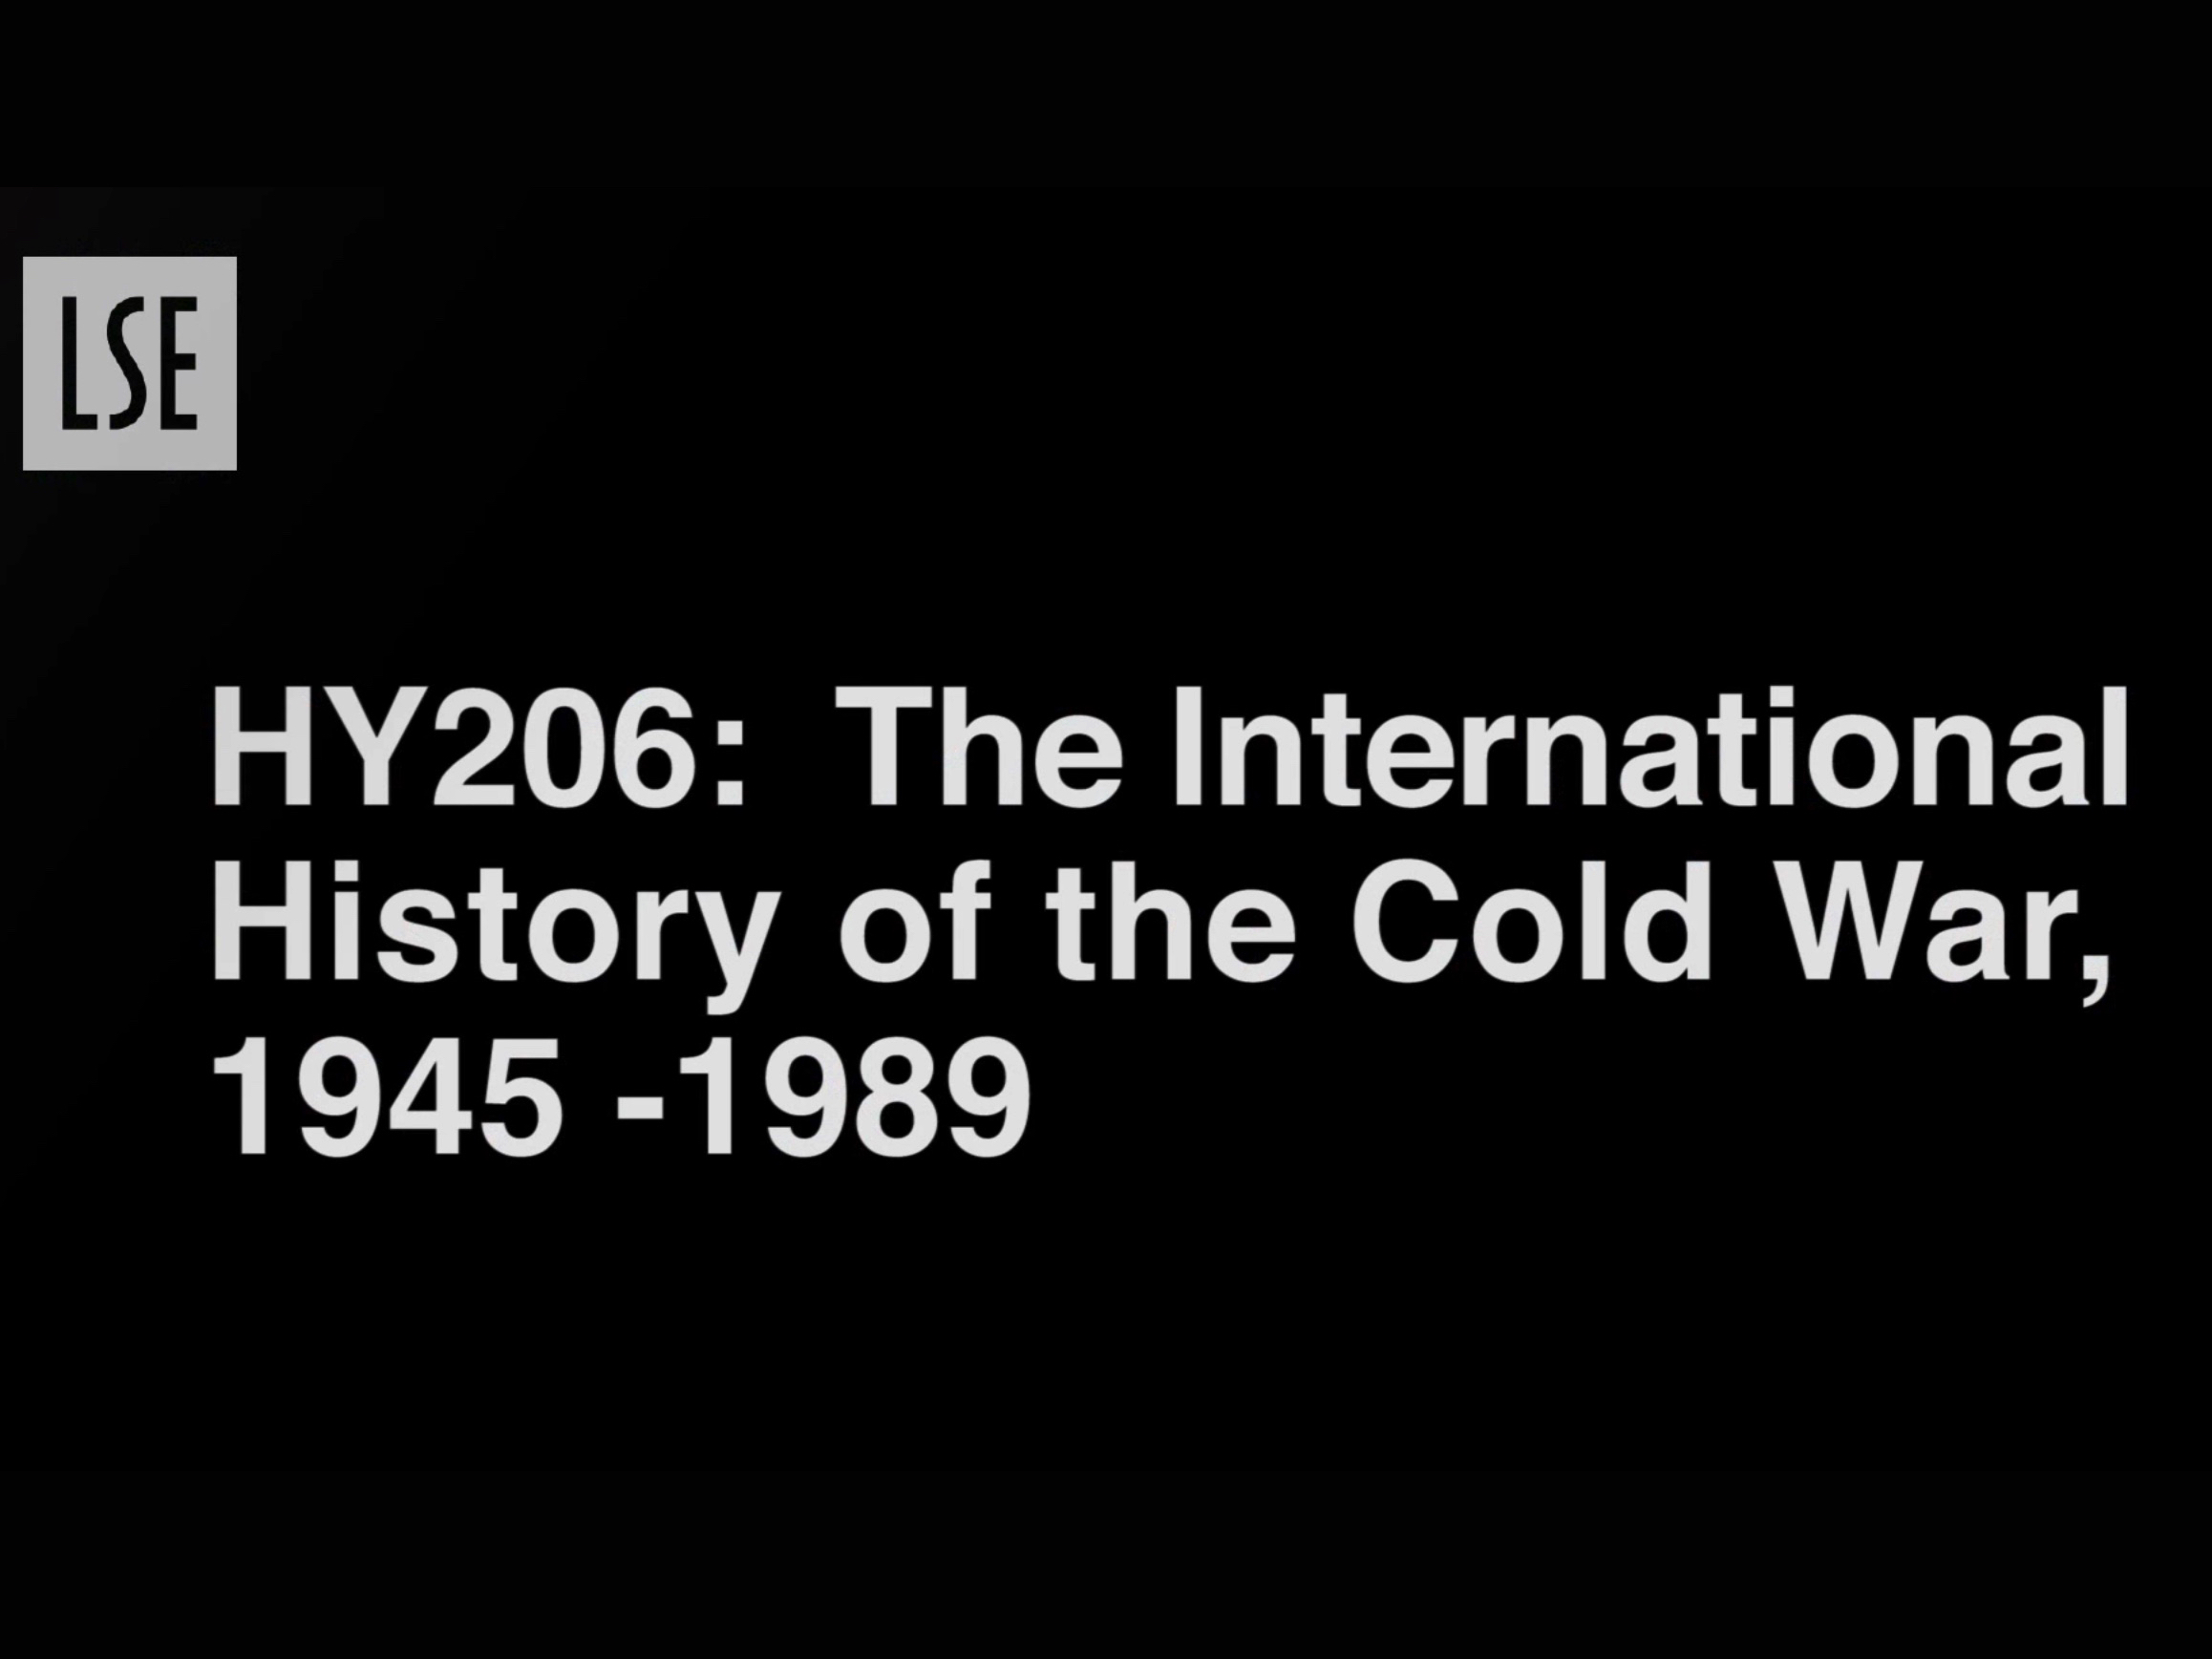 HY206: The International History of the Cold War, 1945-1989